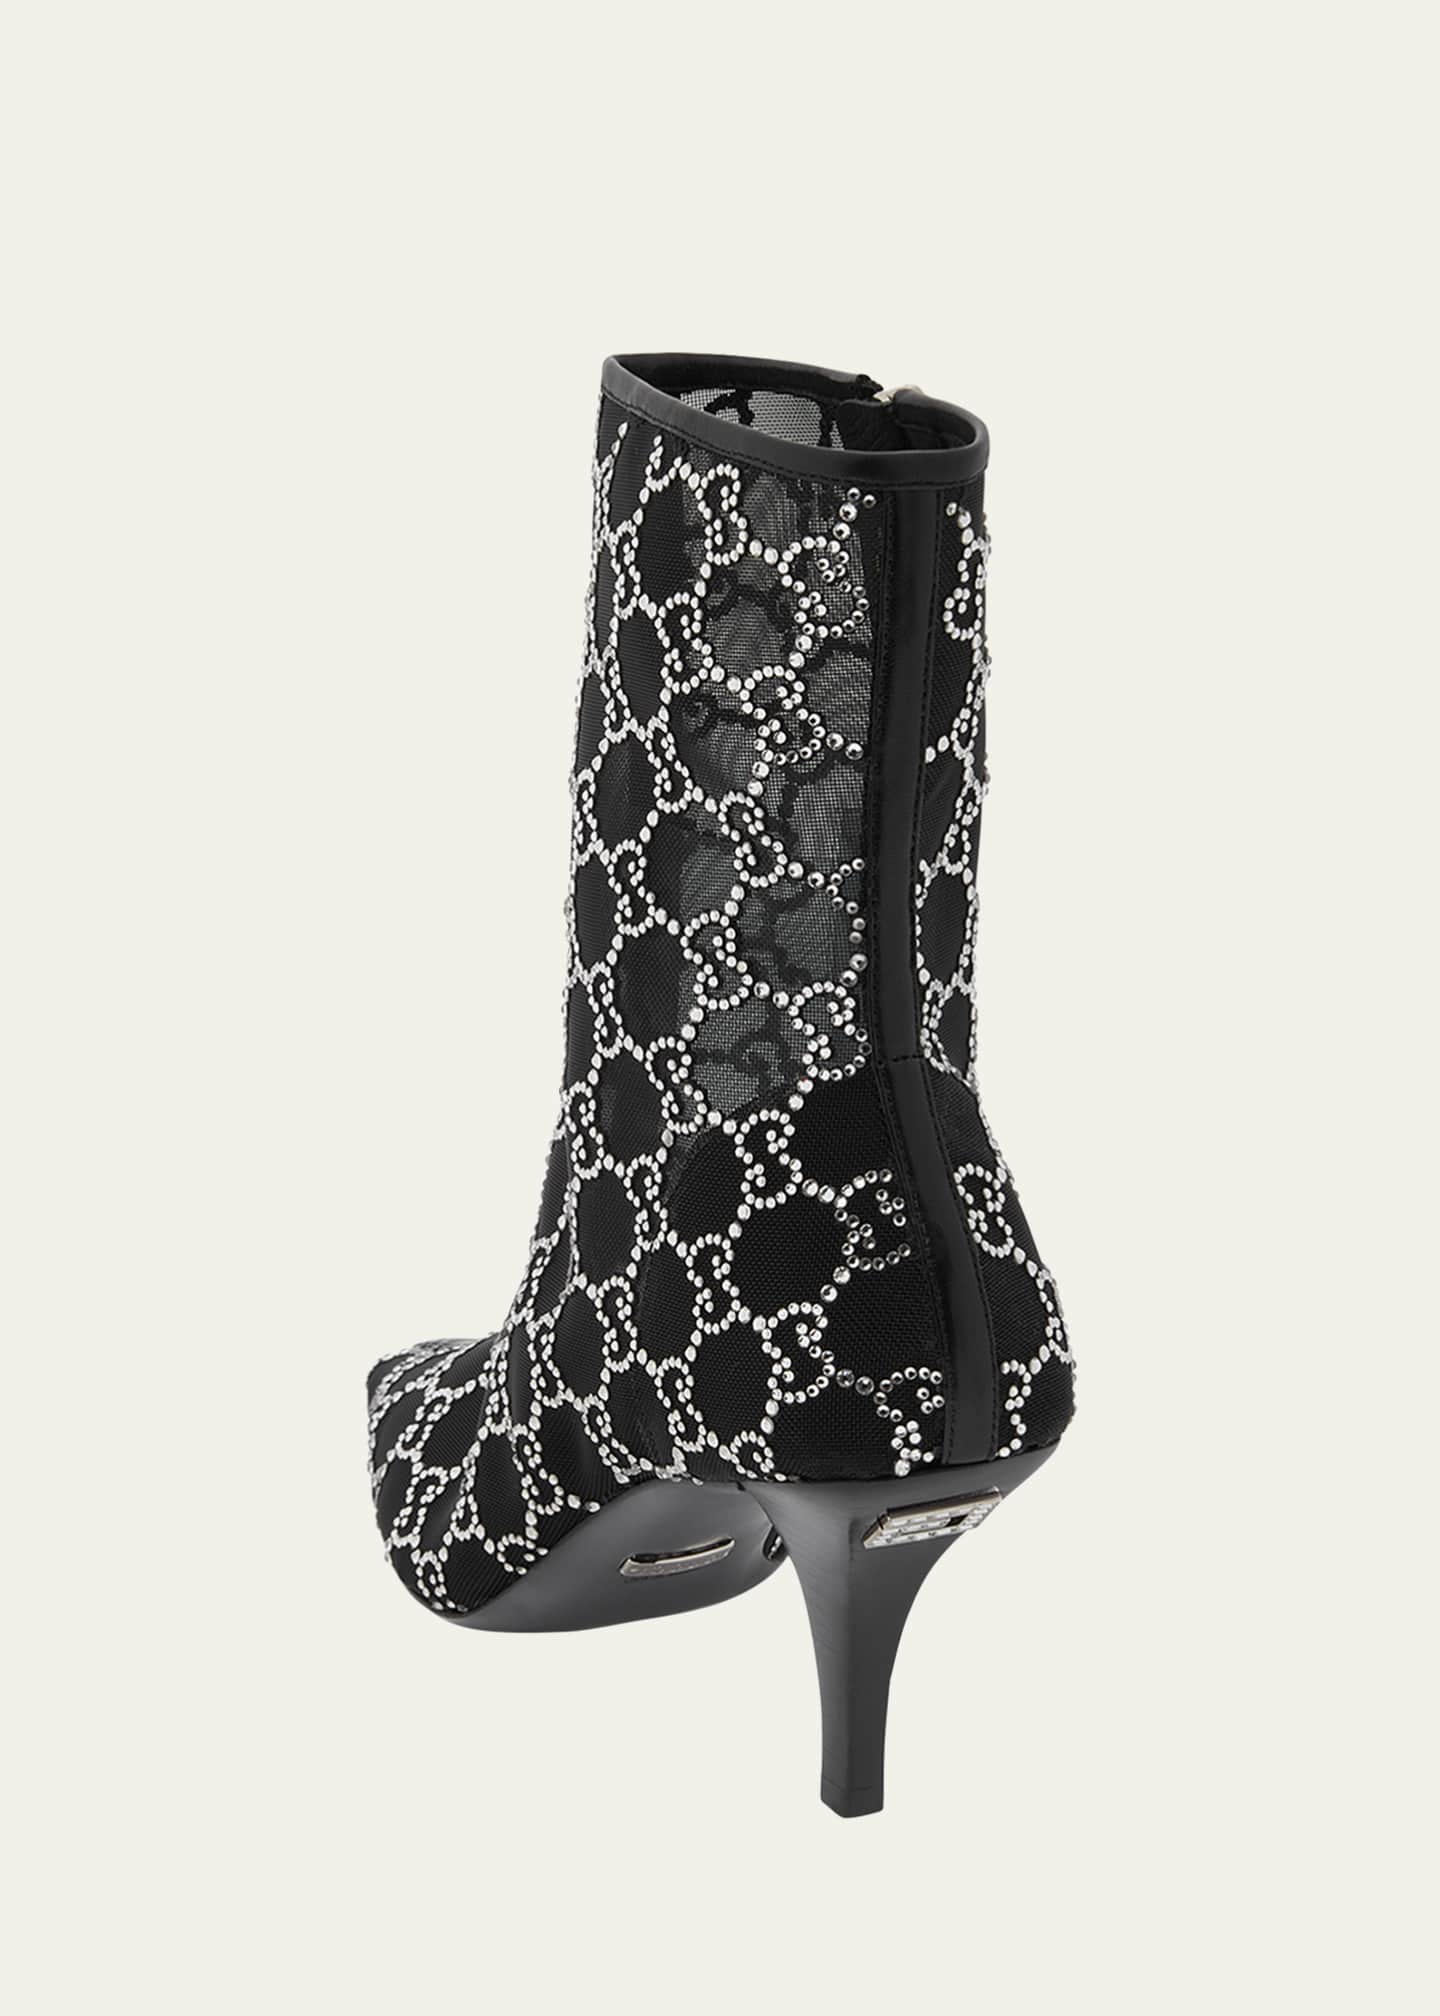 Gucci Demi Crystal Mesh Ankle Booties - Bergdorf Goodman